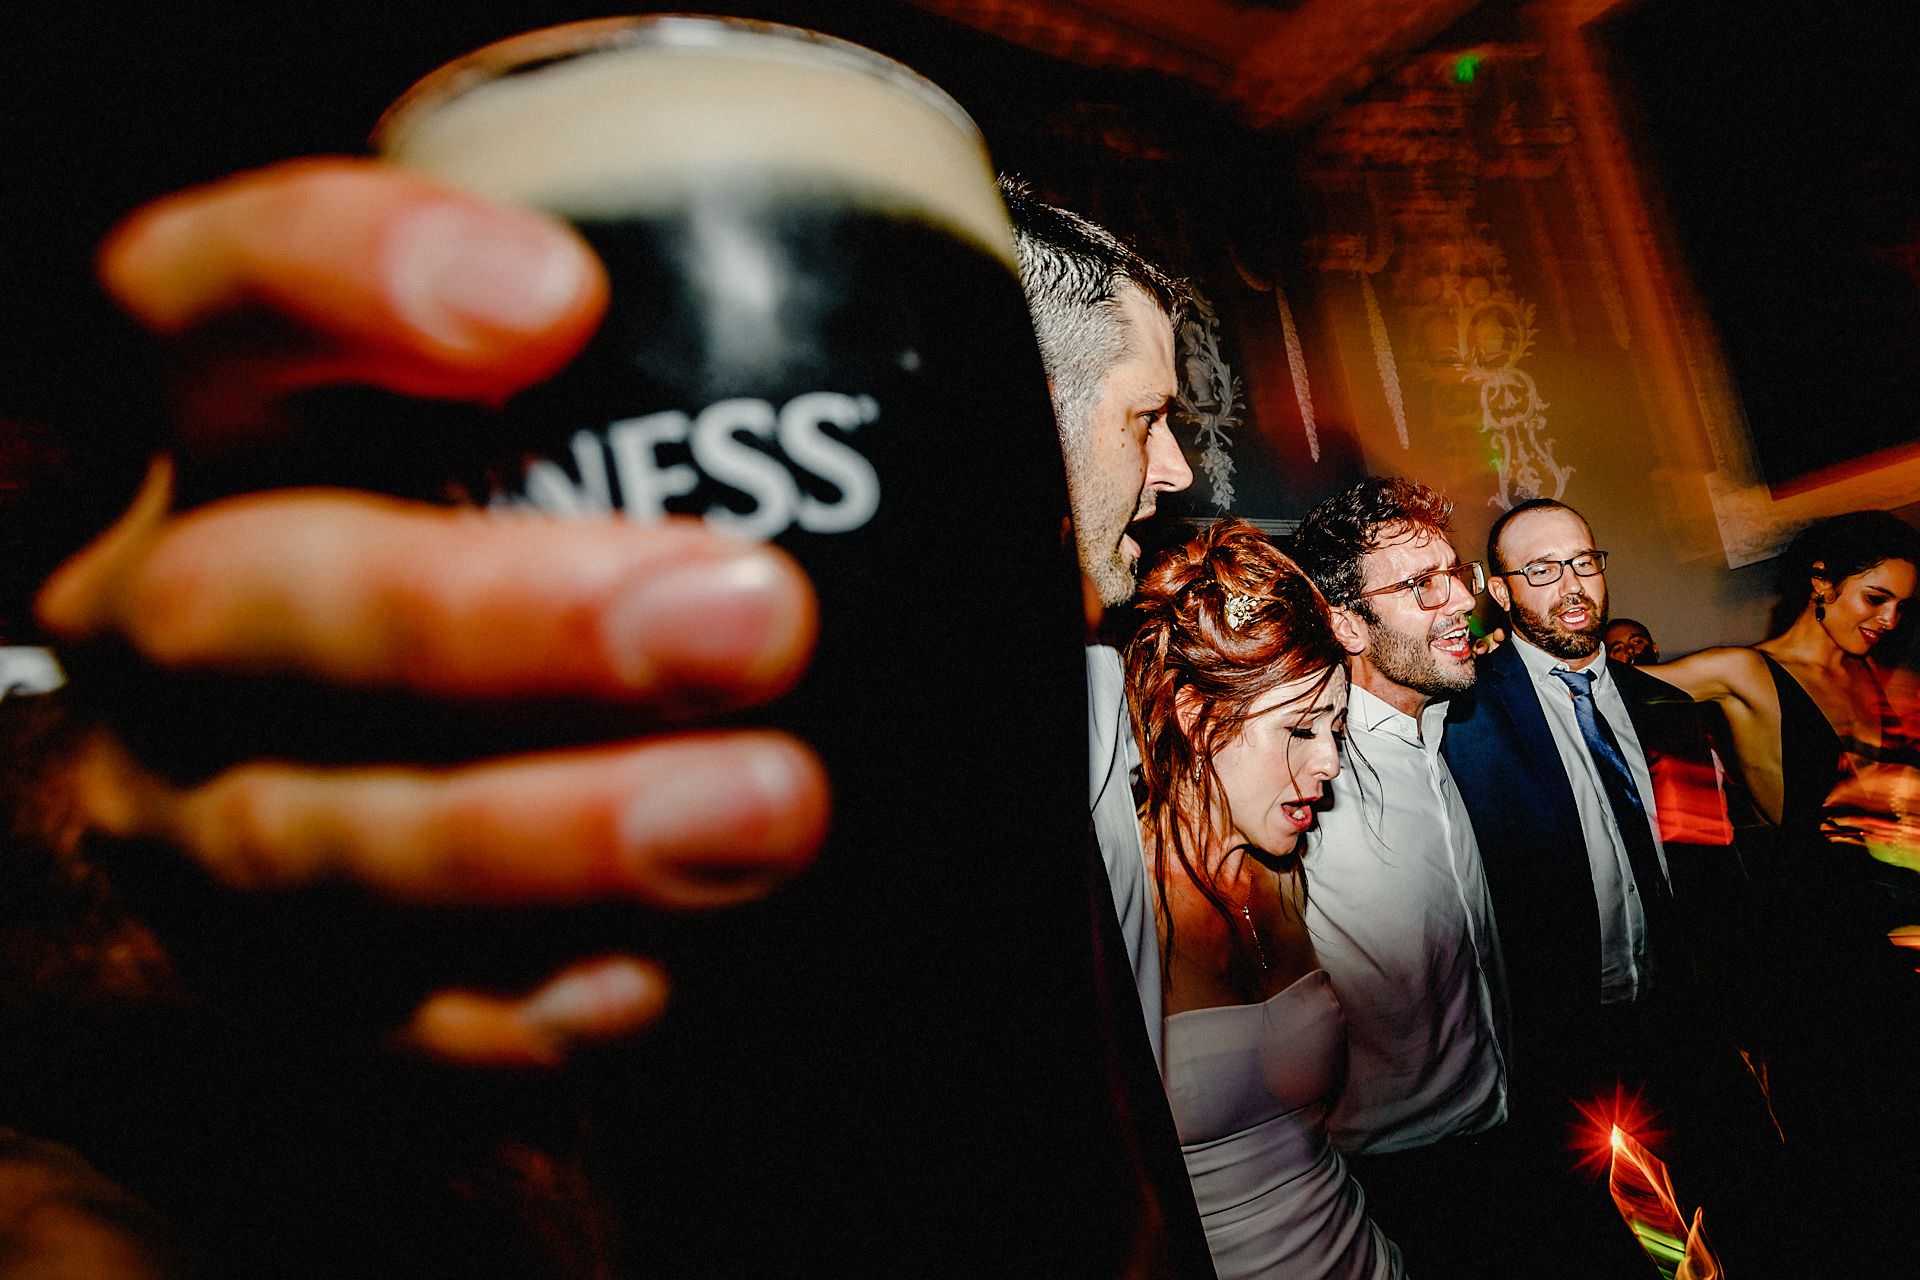 pint of guinness, in a dancing photo